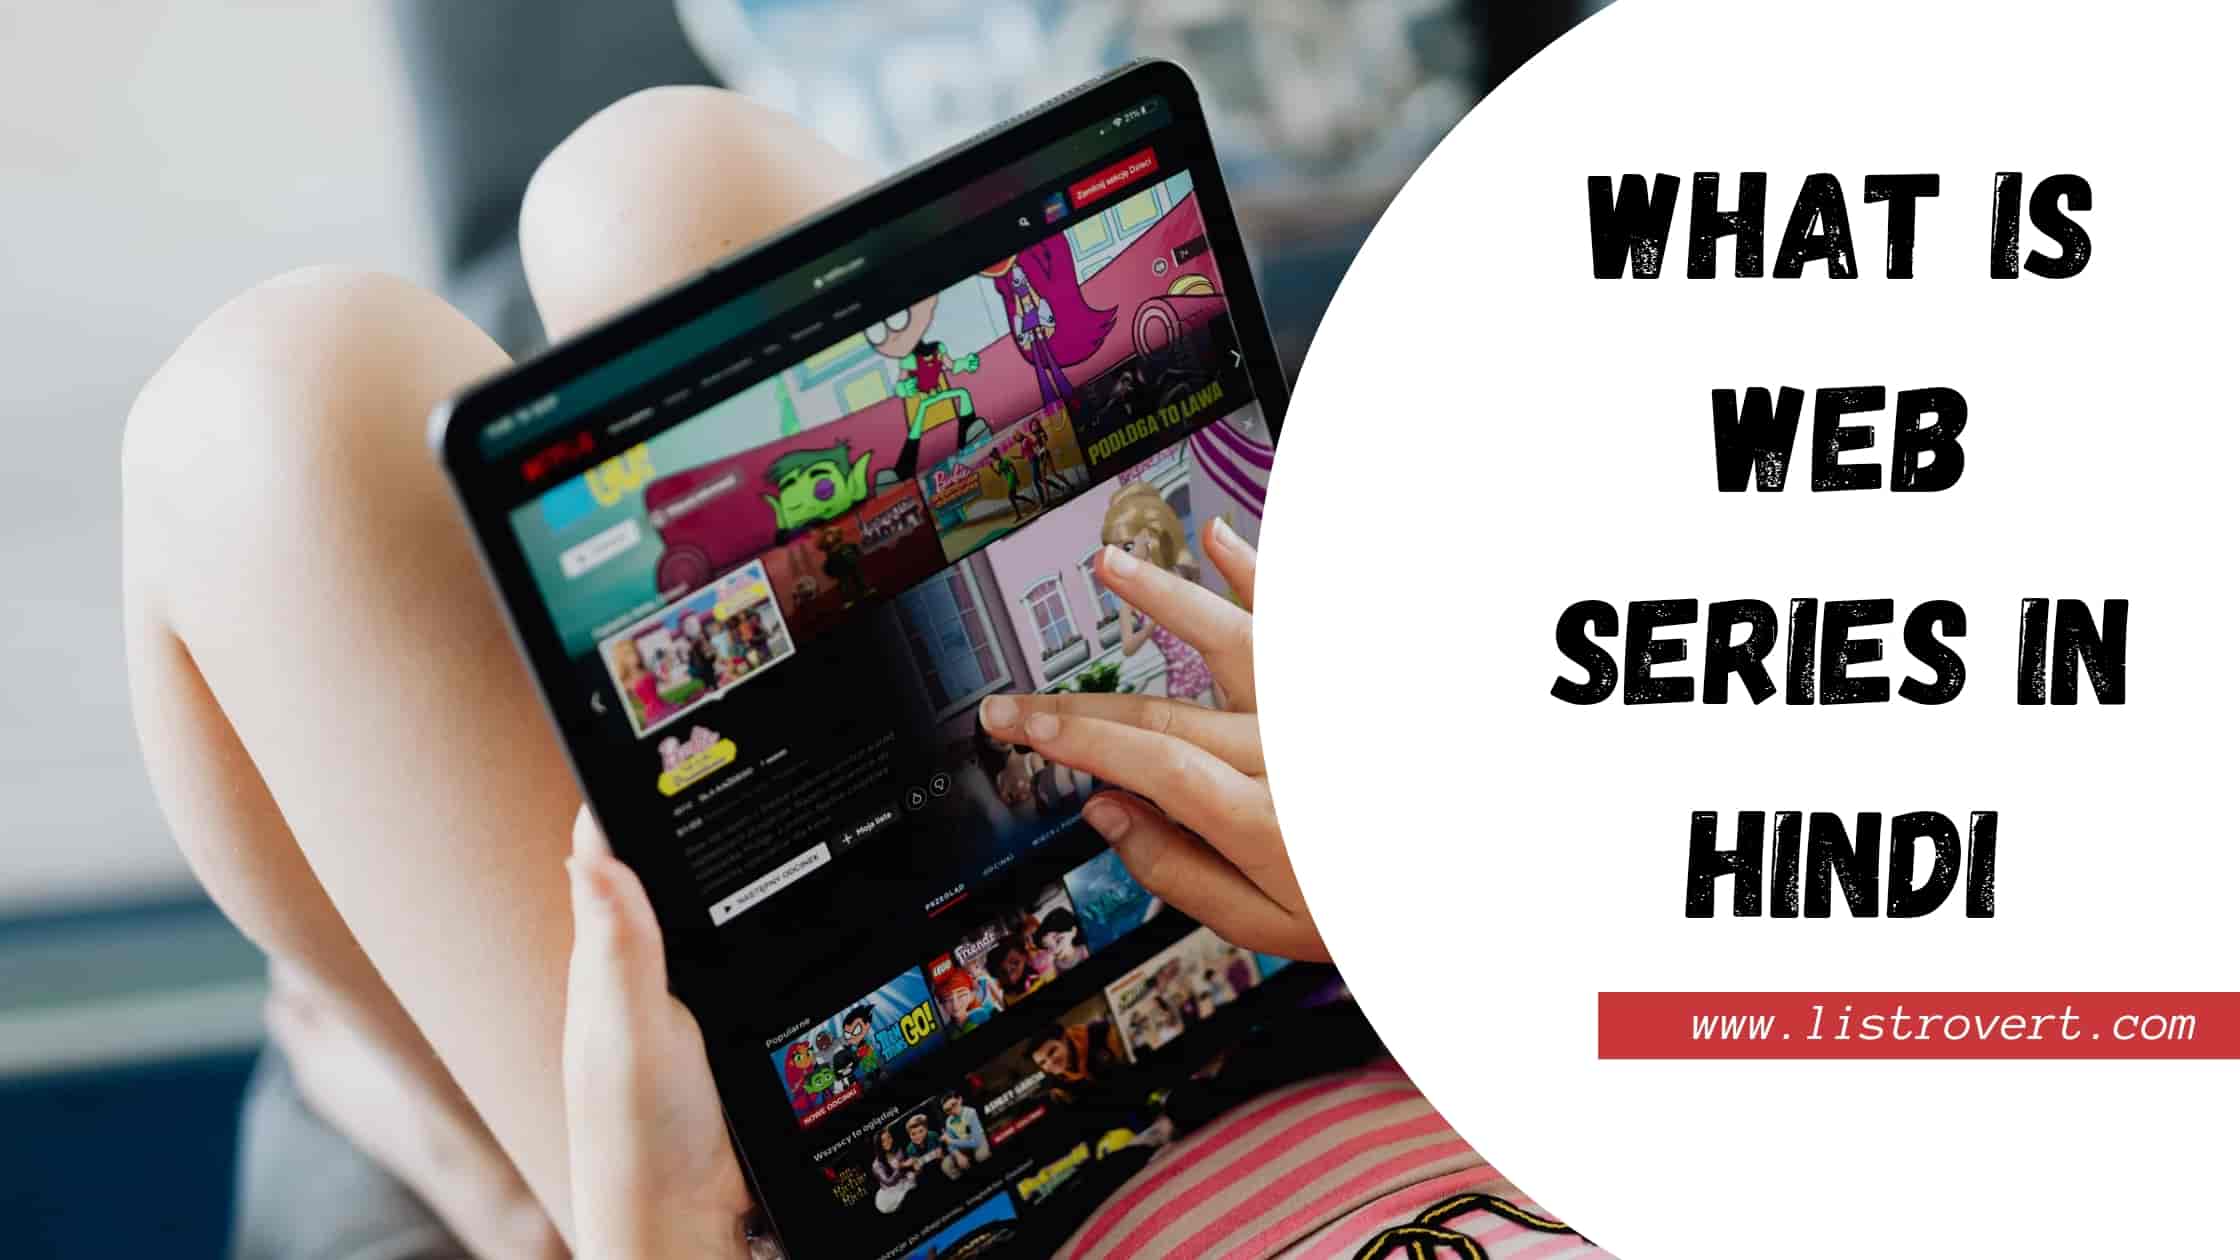 What is web series in Hindi